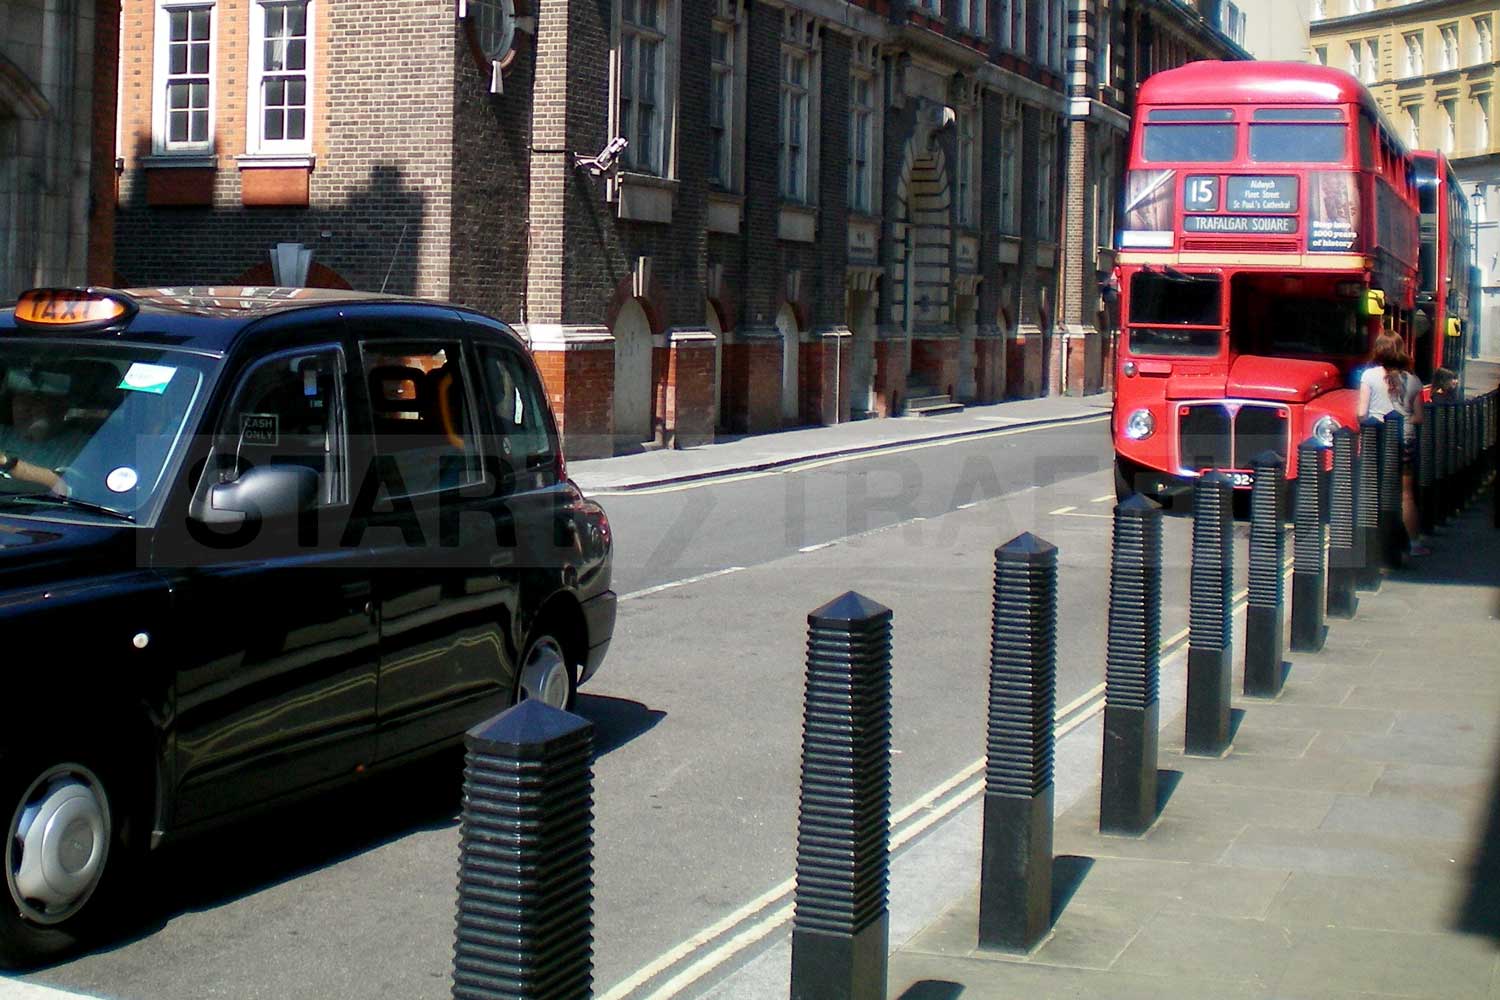 Decorative Bollards being used in London